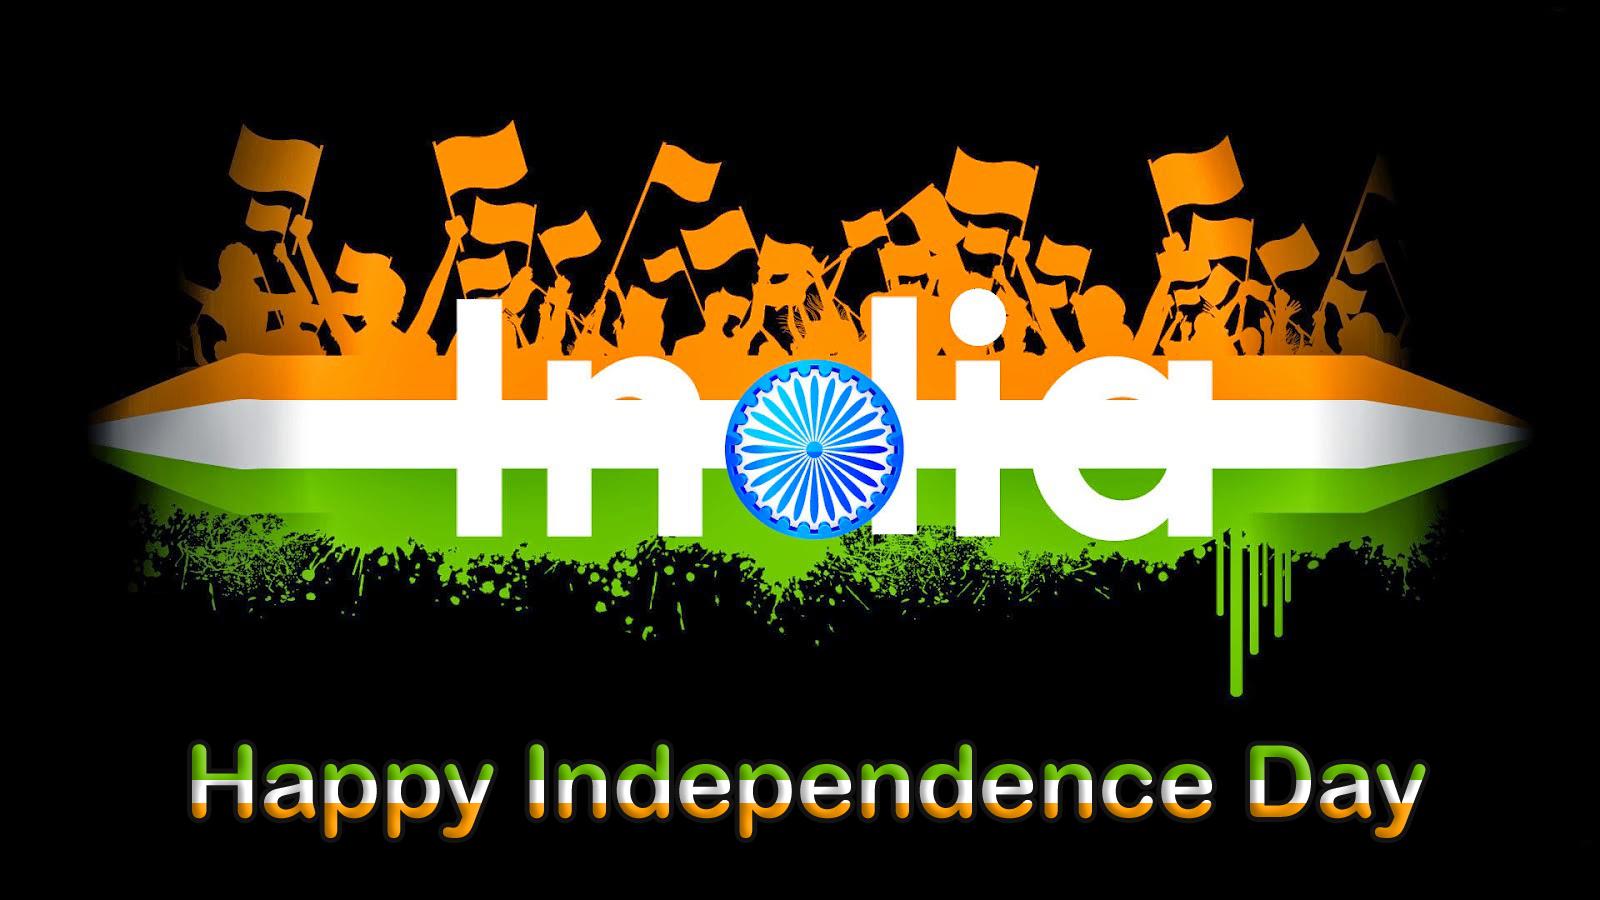 Happy Independence Day Image HD August 15 Wallpaper